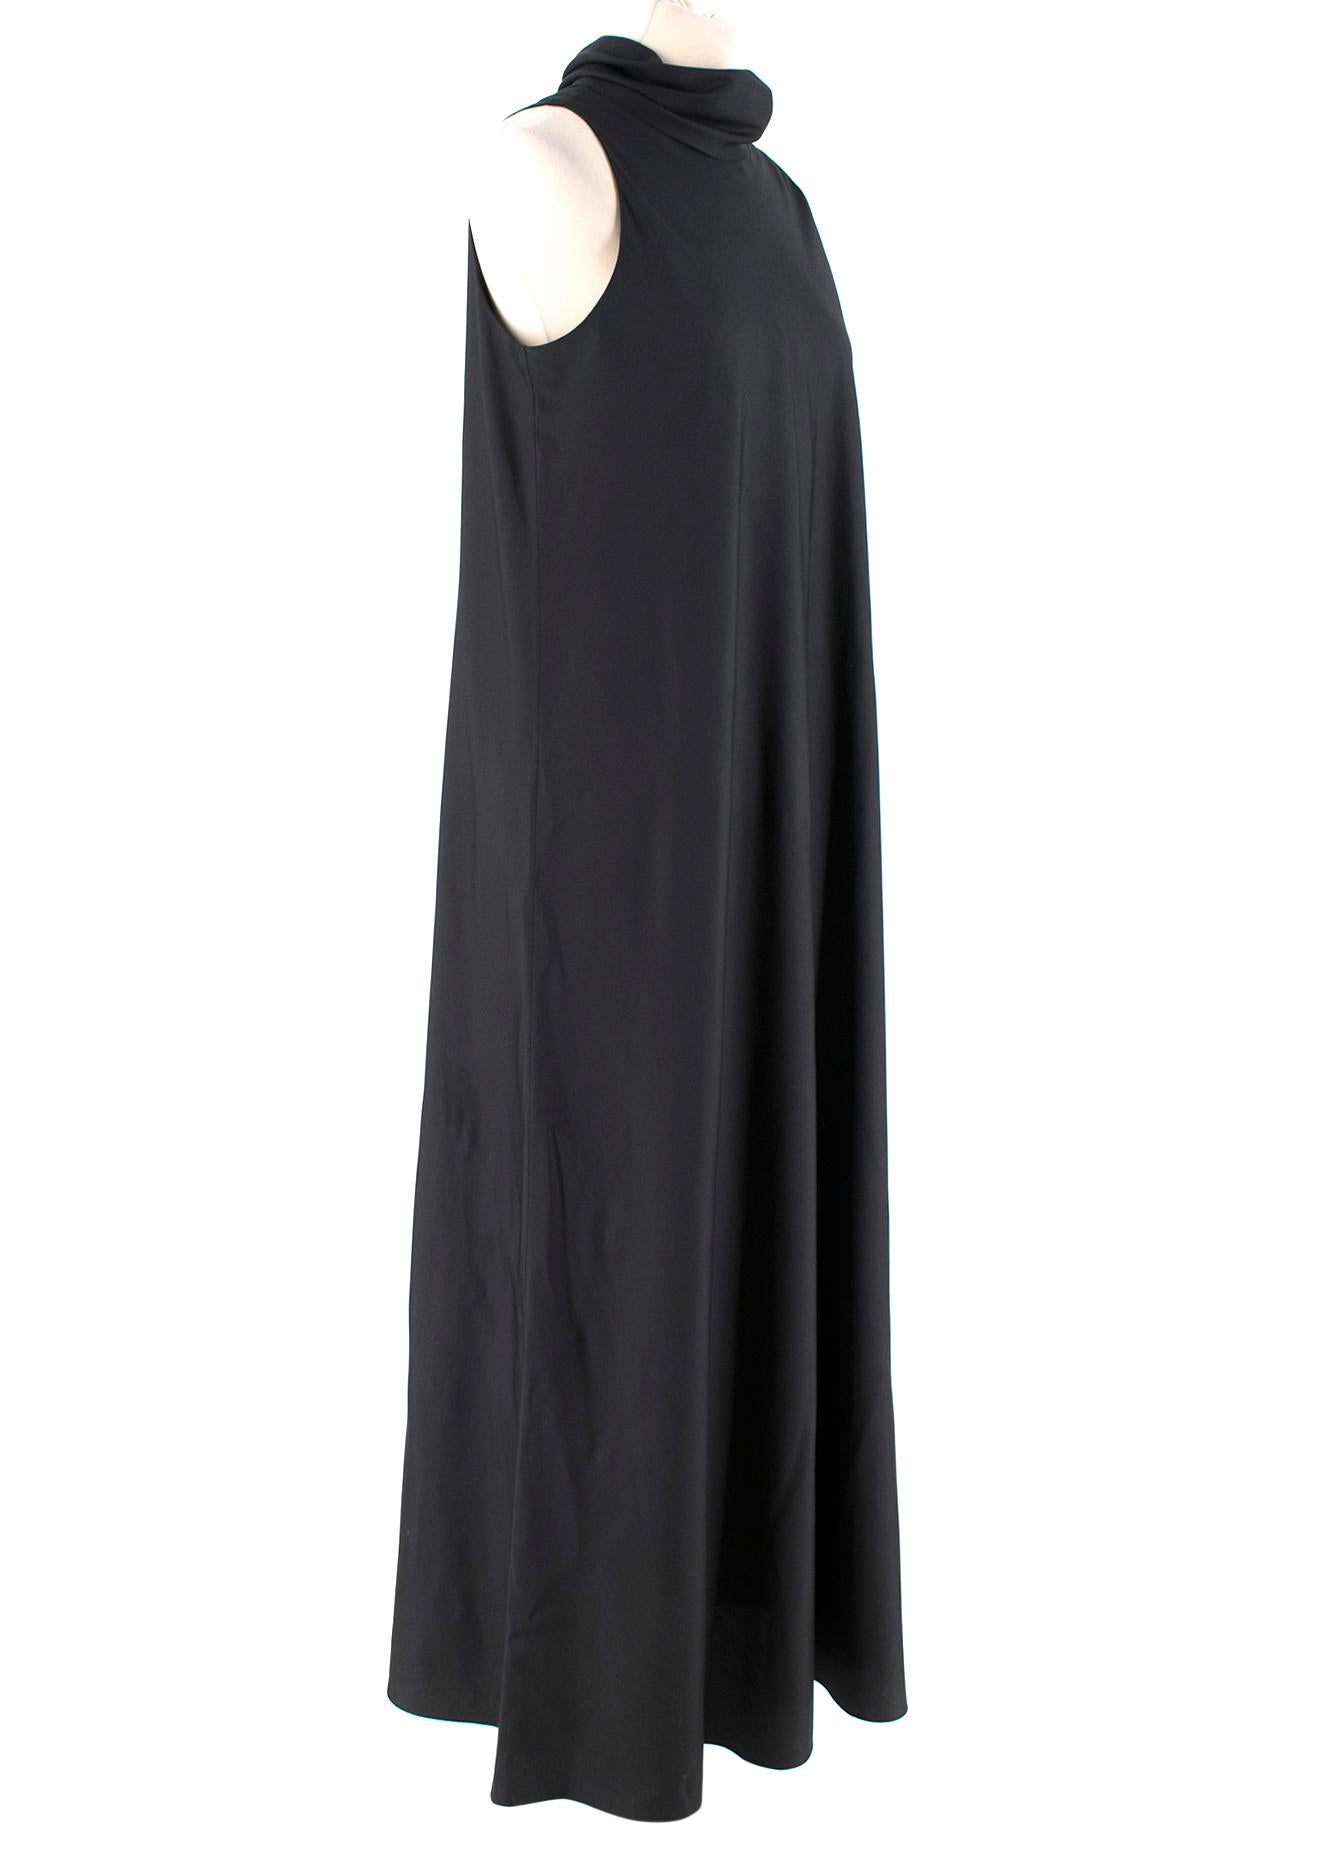 The Row Black Silk Maxi Dress

- Knot Collar
- Sleveless
- Unlined

Please note, these items are pre-owned and may show signs of being stored even when unworn and unused. This is reflected within the significantly reduced price. Please refer to